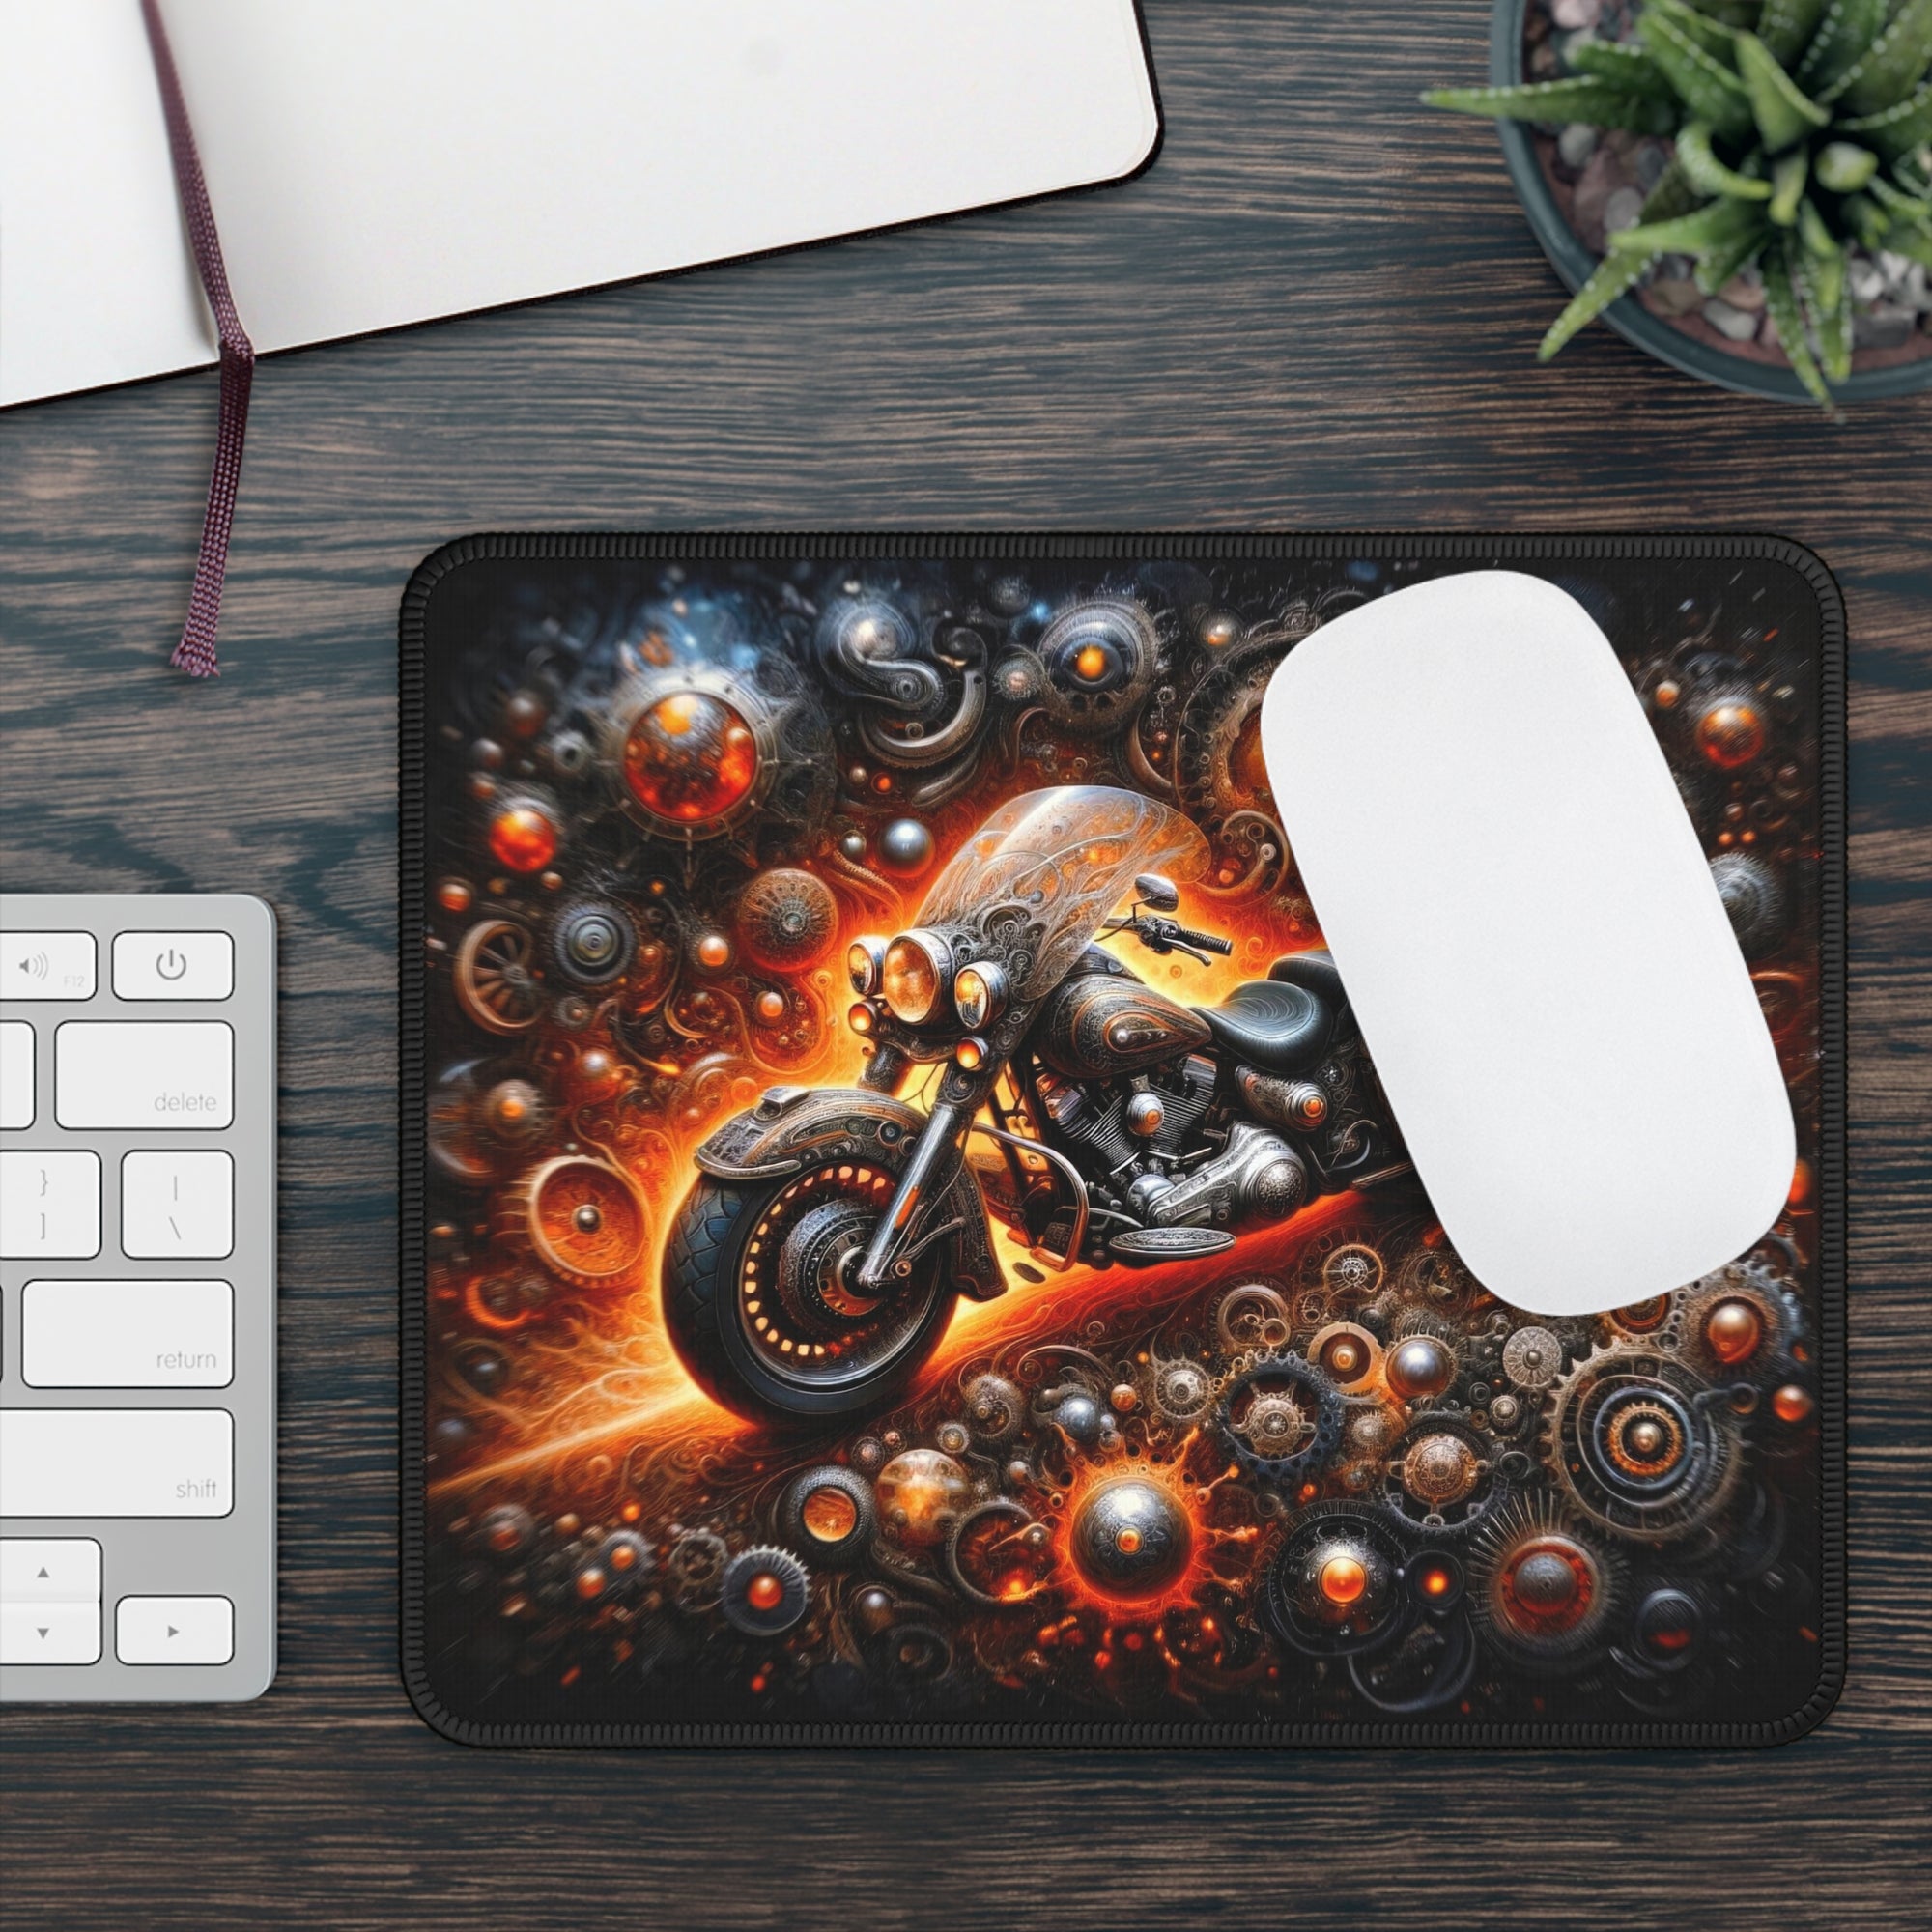 The Engine of Stars Gaming Mouse Pad